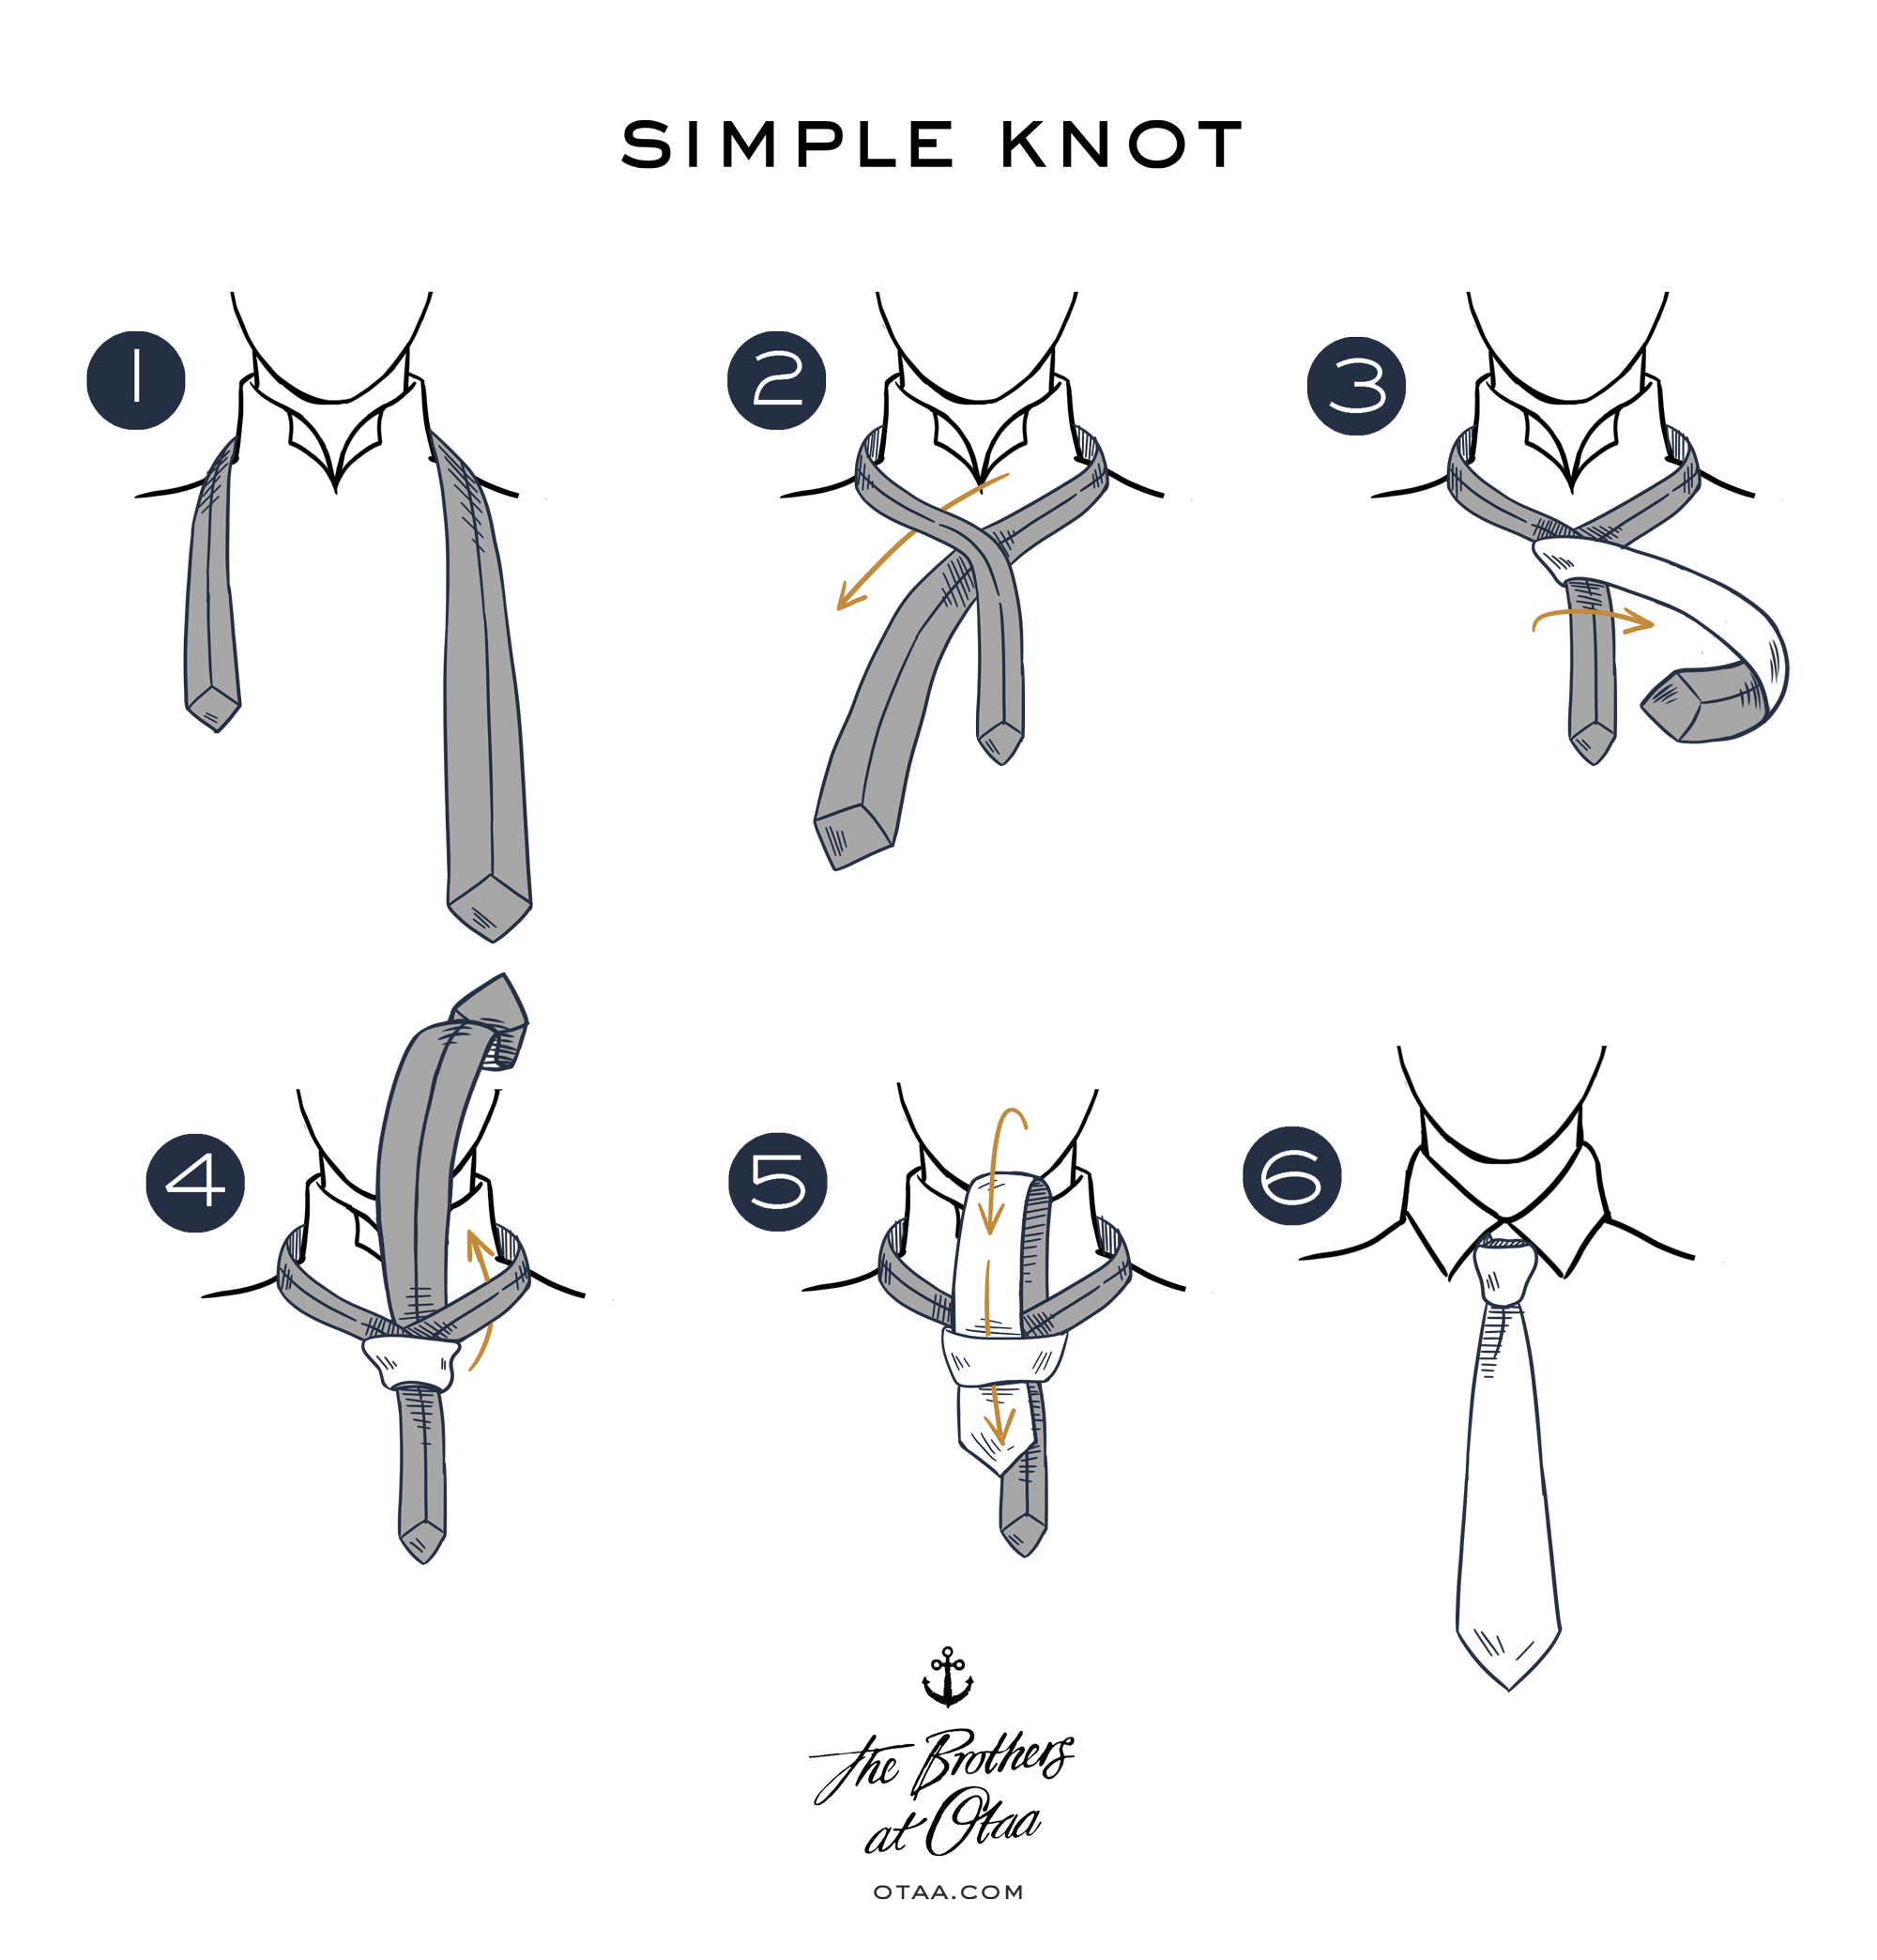 How To Tie a Simple Knot, Tie Knot Tutorial, Learn How to Tie a Tie